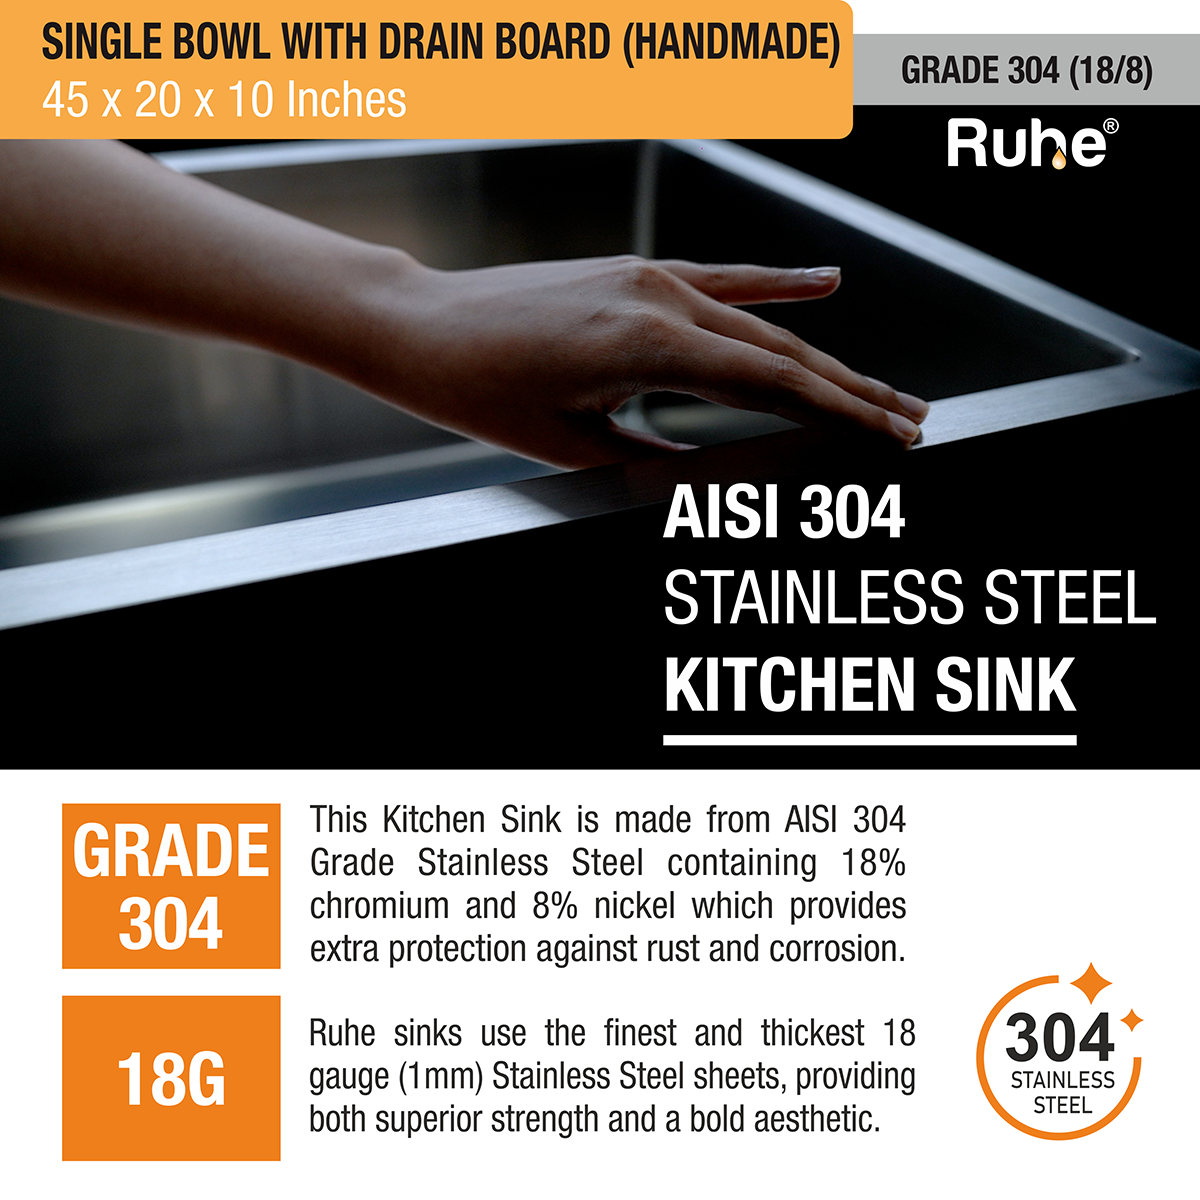 Handmade Single Bowl with Drainboard 304-Grade Kitchen Sink (45 x 20 x 10 Inches) 304 stainless steel